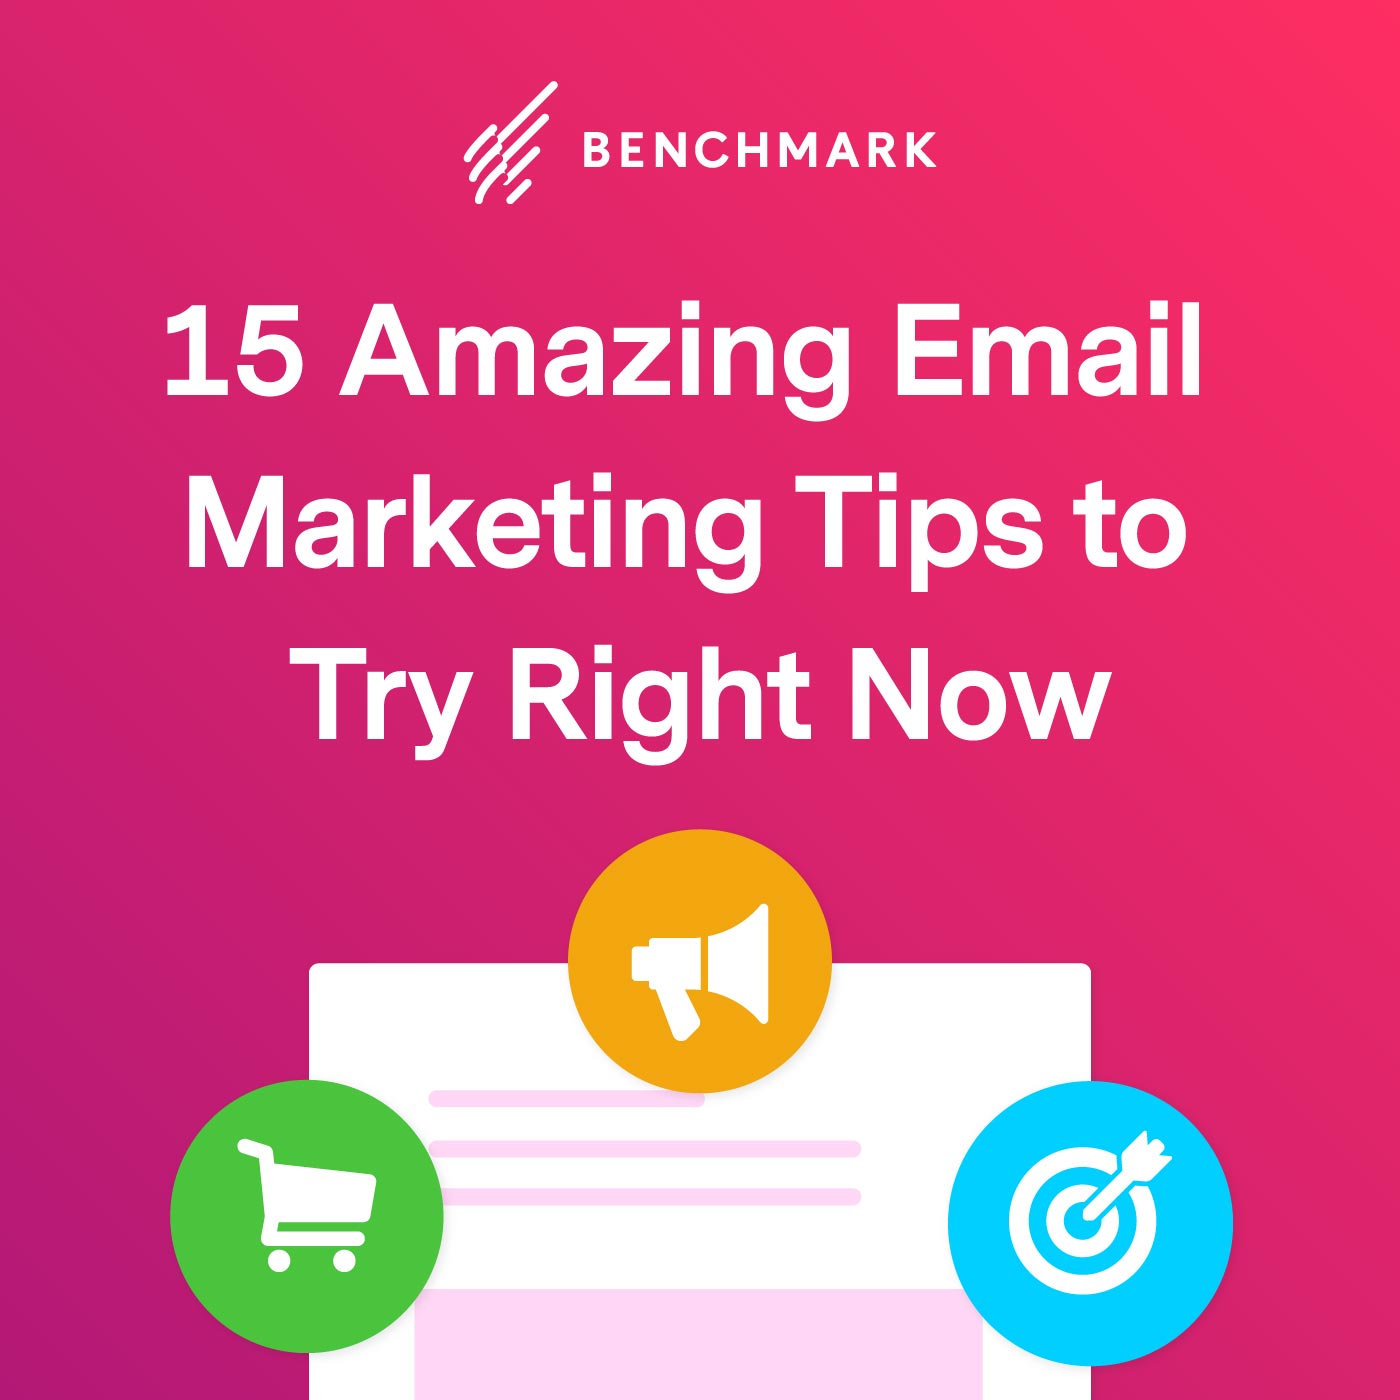 15 Amazing Email Marketing Tips to Try Right Now